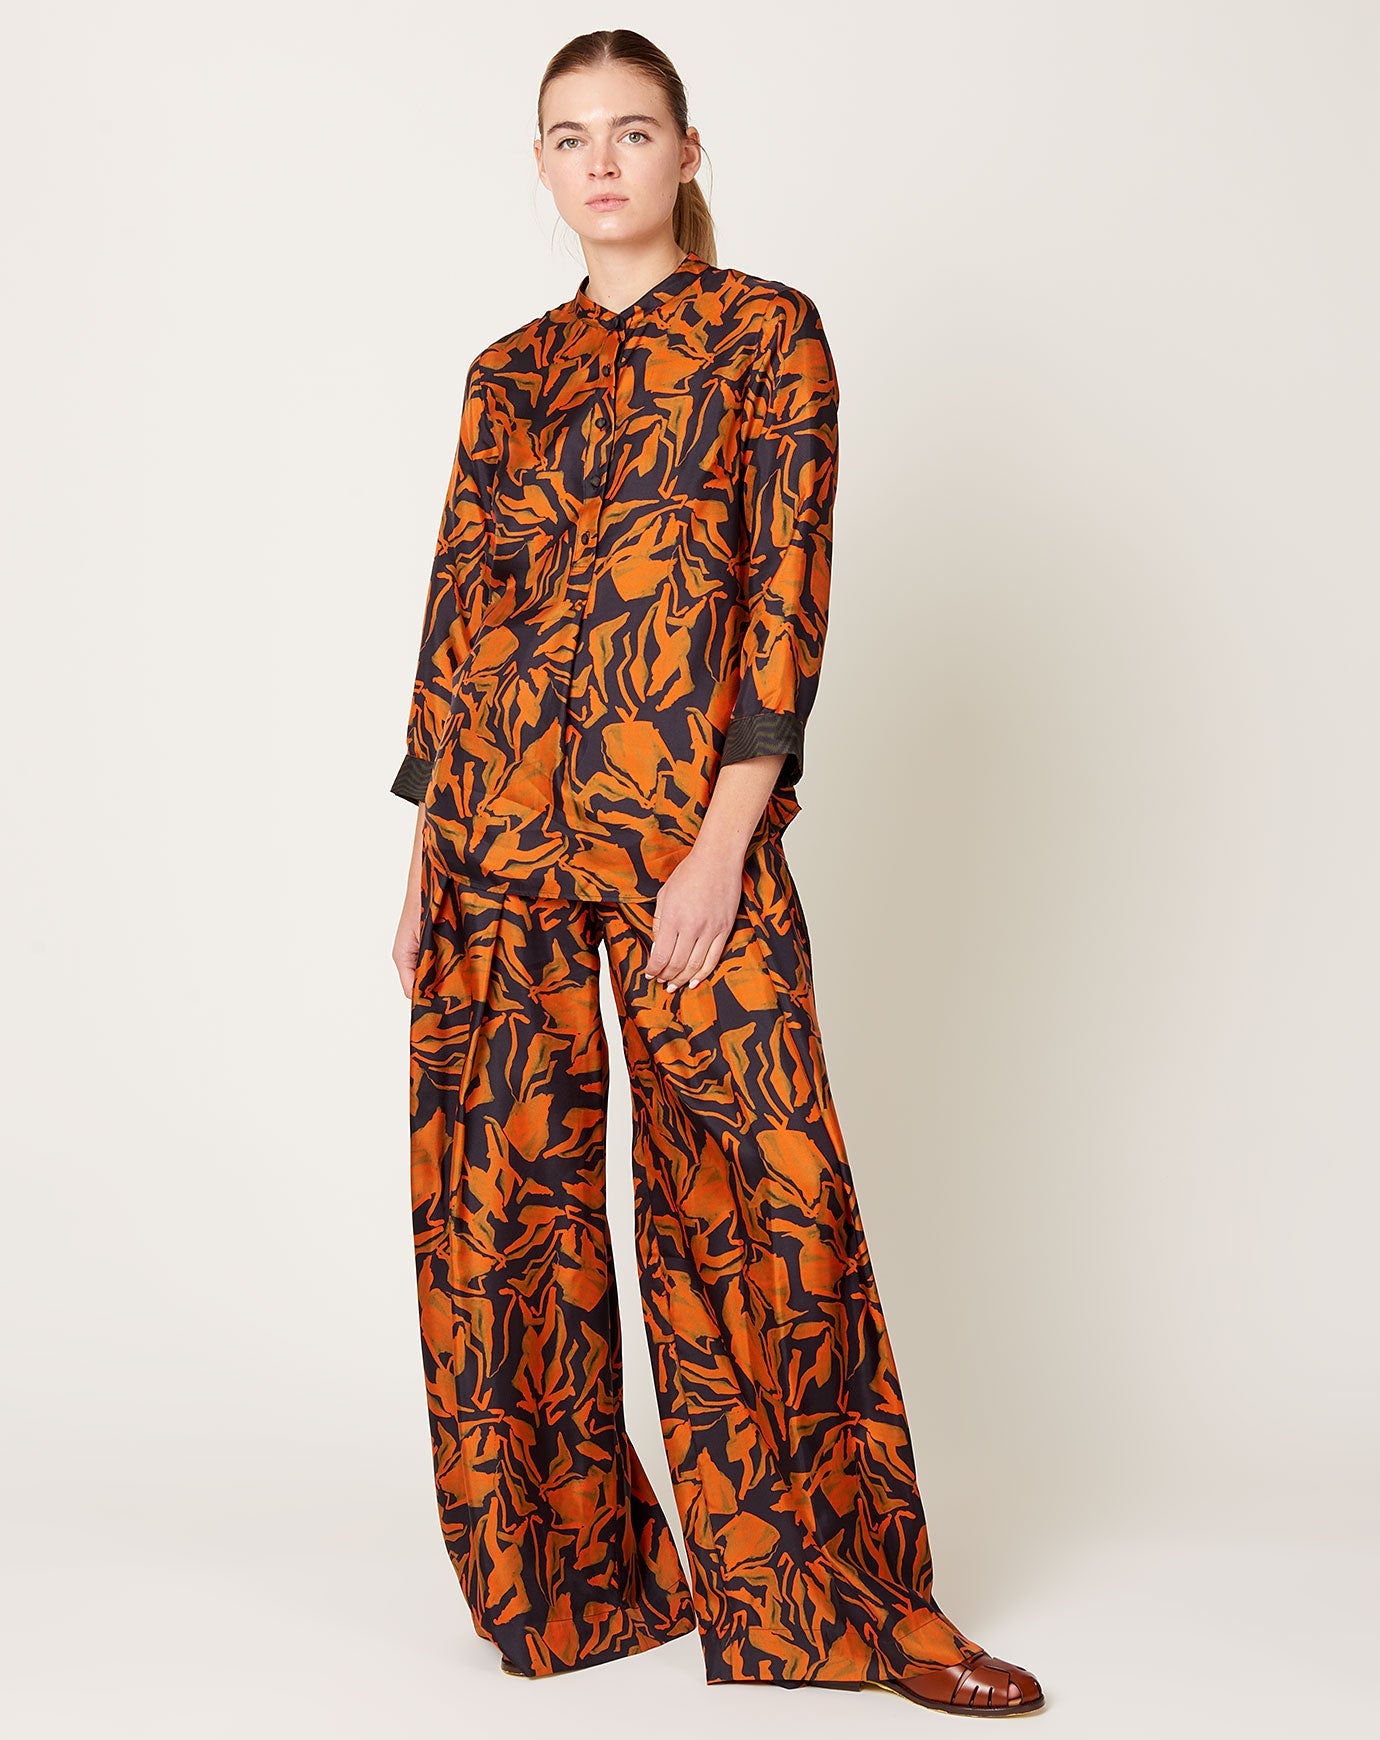 Raquel Allegra Henley in Painted Abstract Forest Vibrations Print